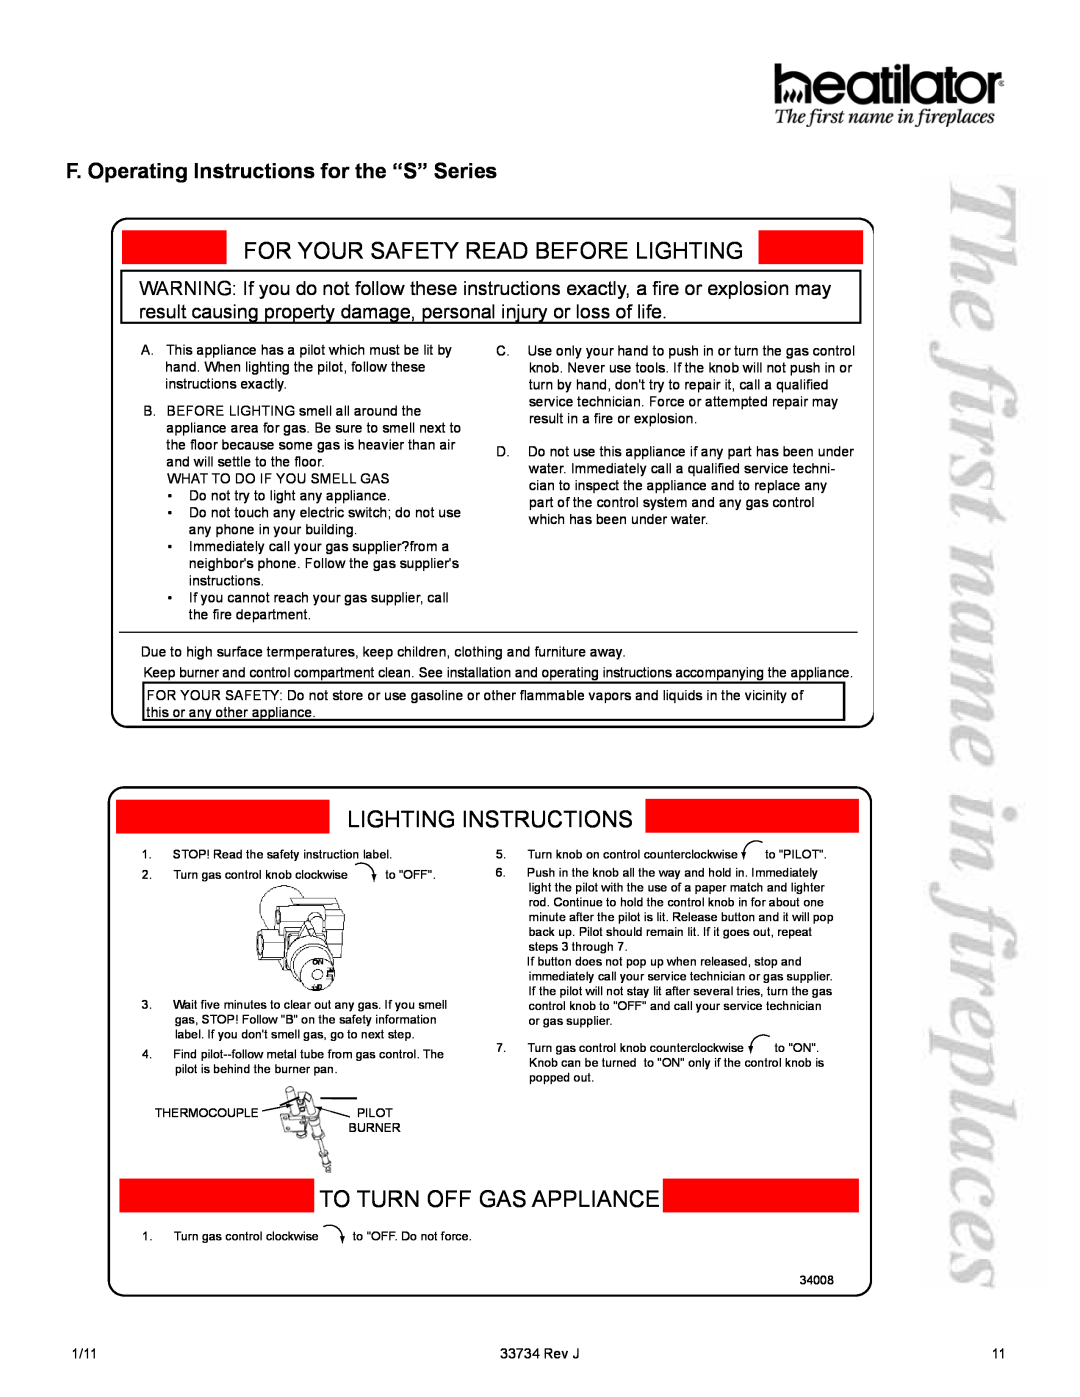 Hearth and Home Technologies FI36S F. Operating Instructions for the “S” Series, For Your Safety Read Before Lighting 